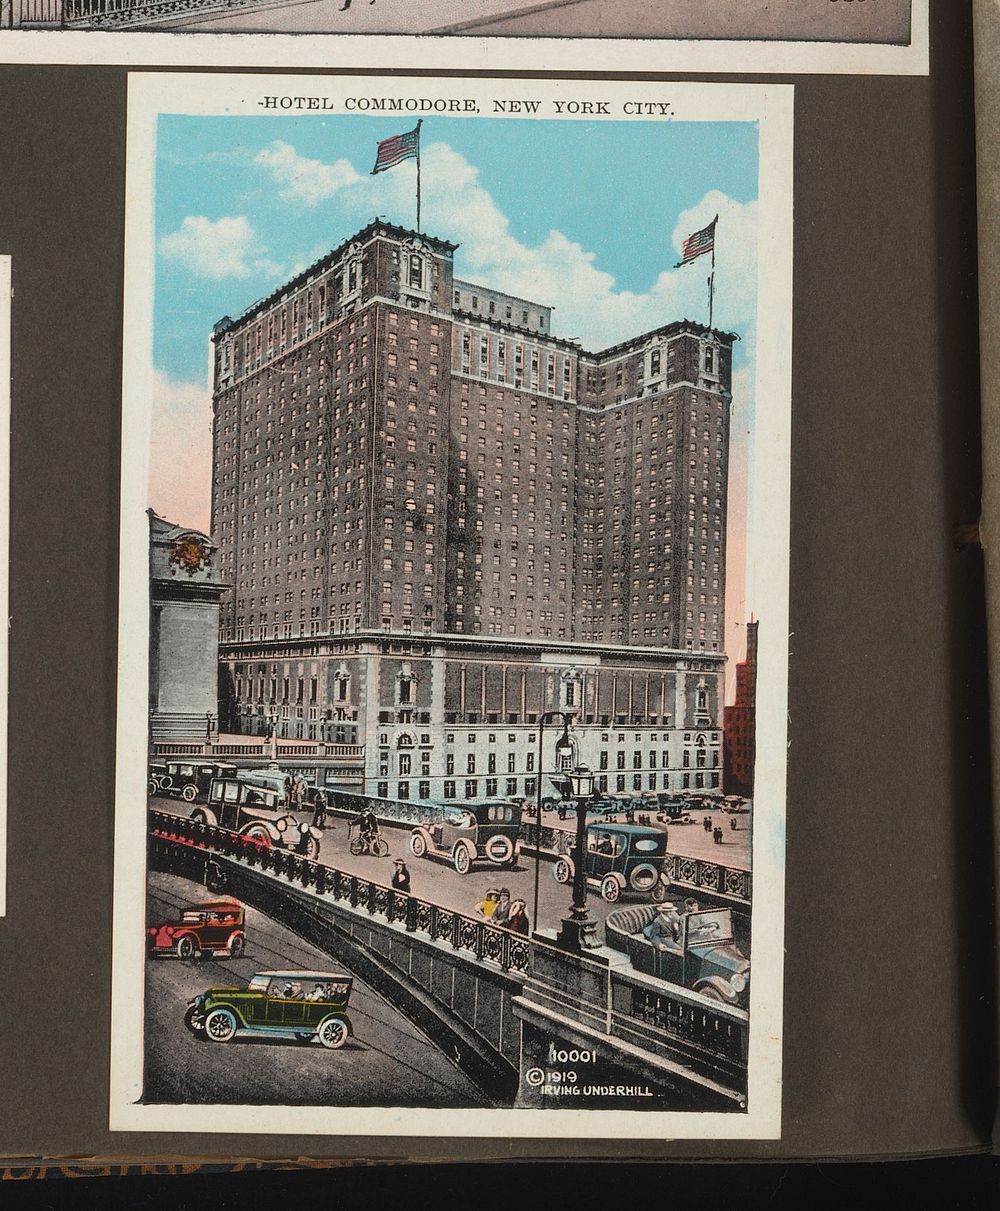 Hotel Commodore, New York City (1919) by Irving S Underhill